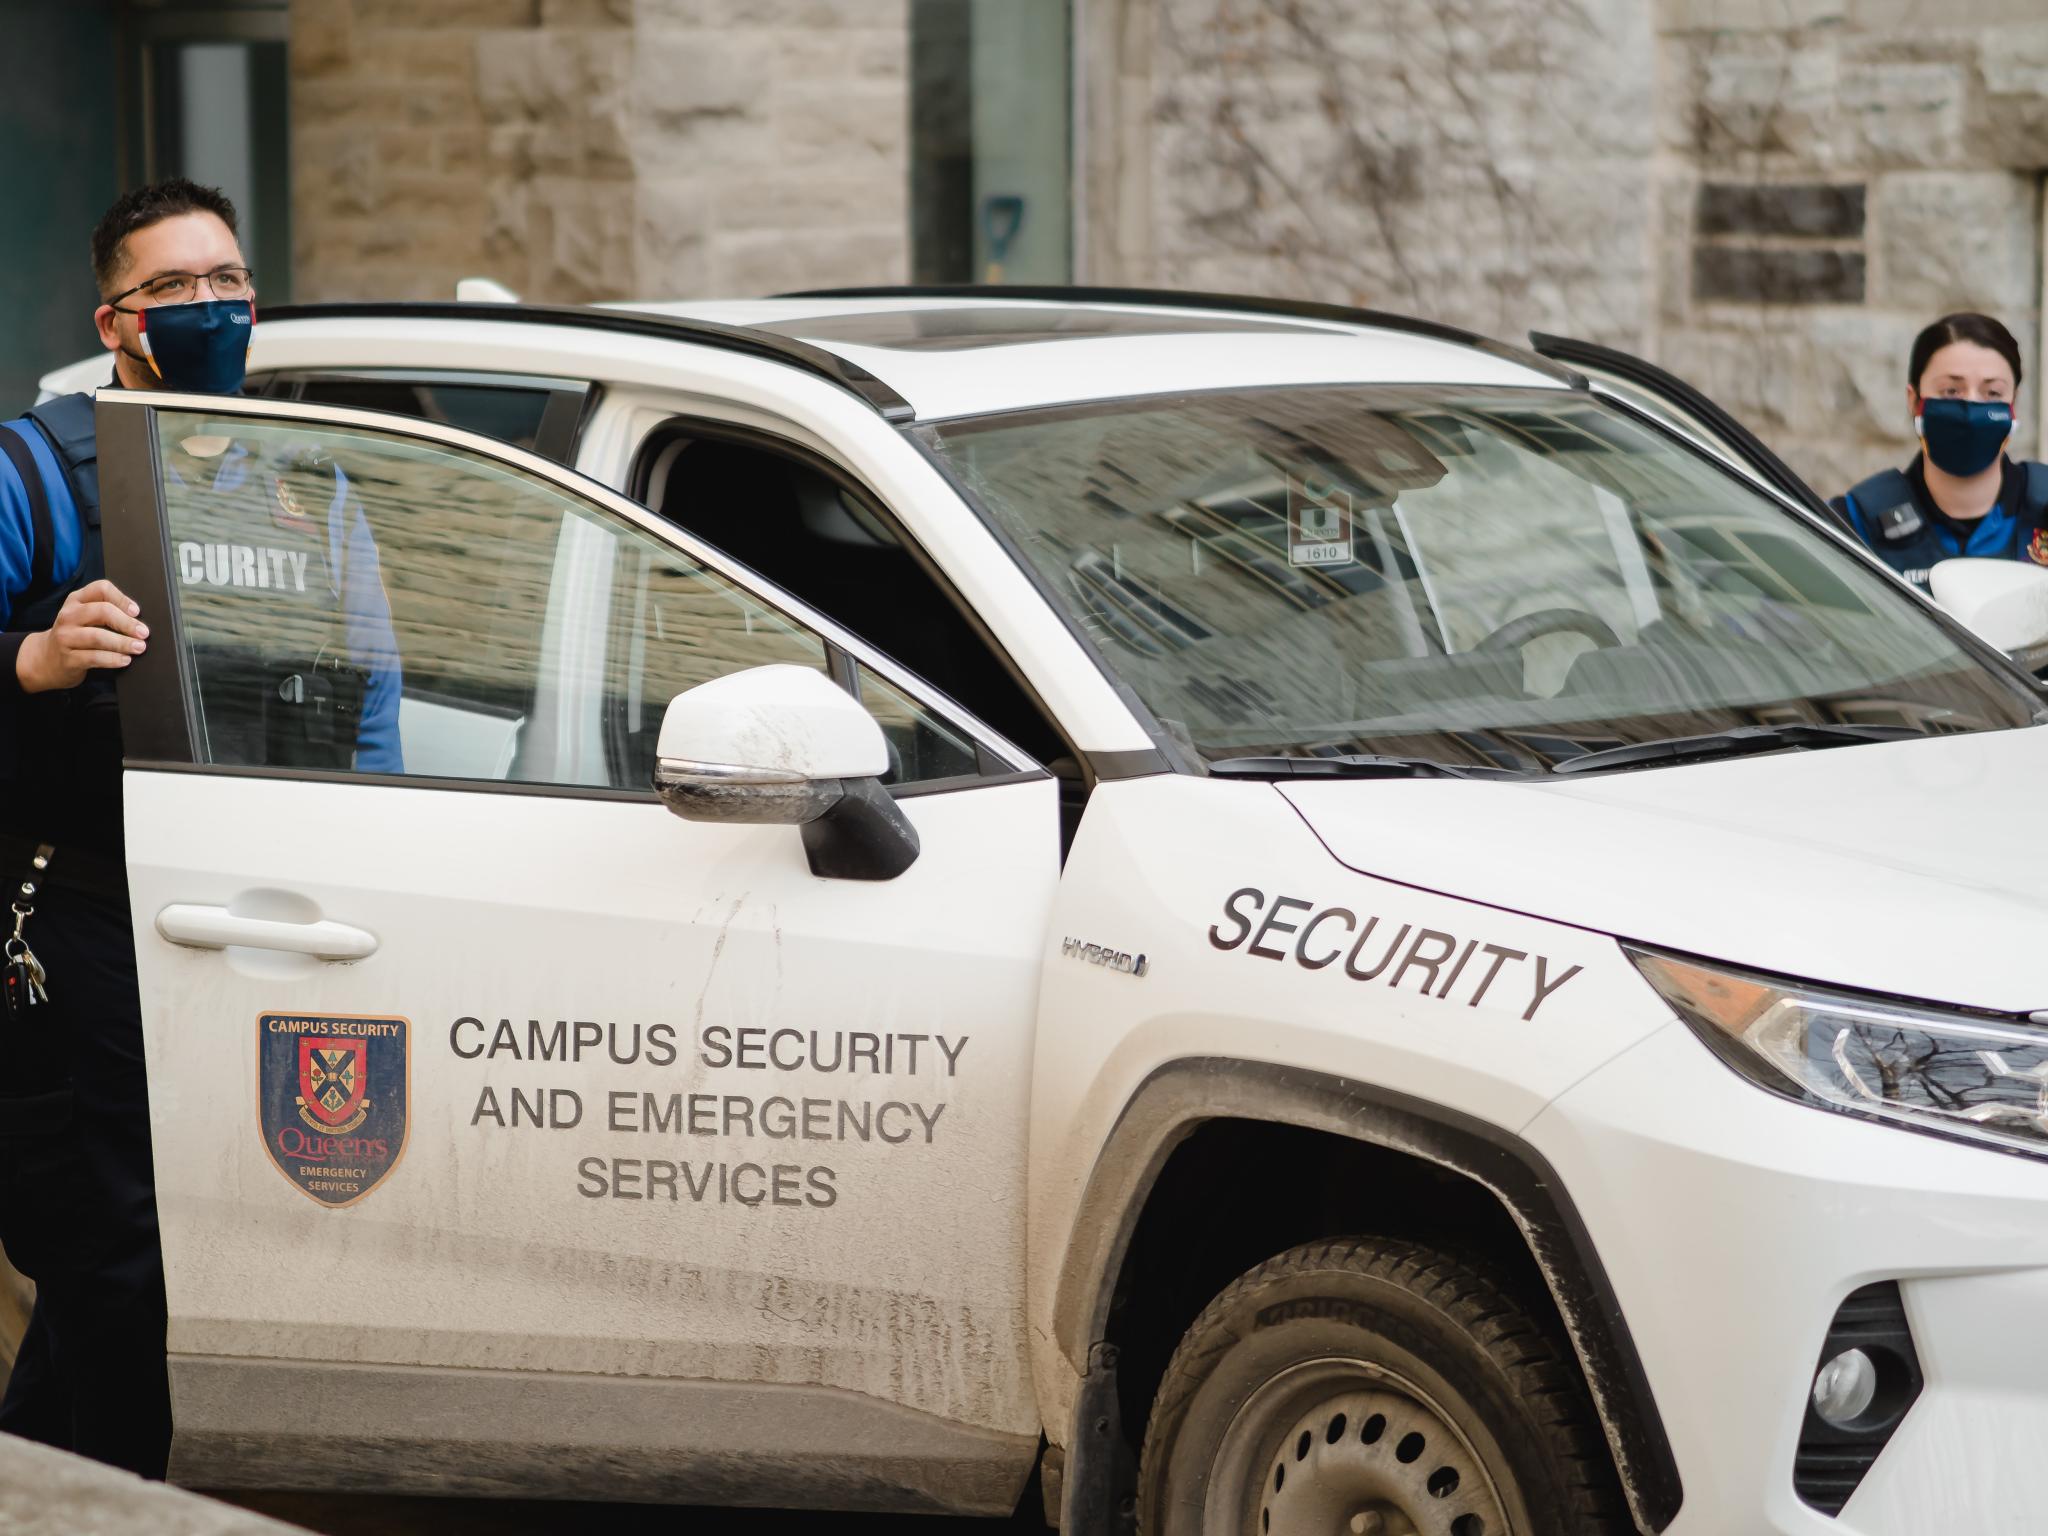 Two campus security officers exiting their vehicle wearing masks